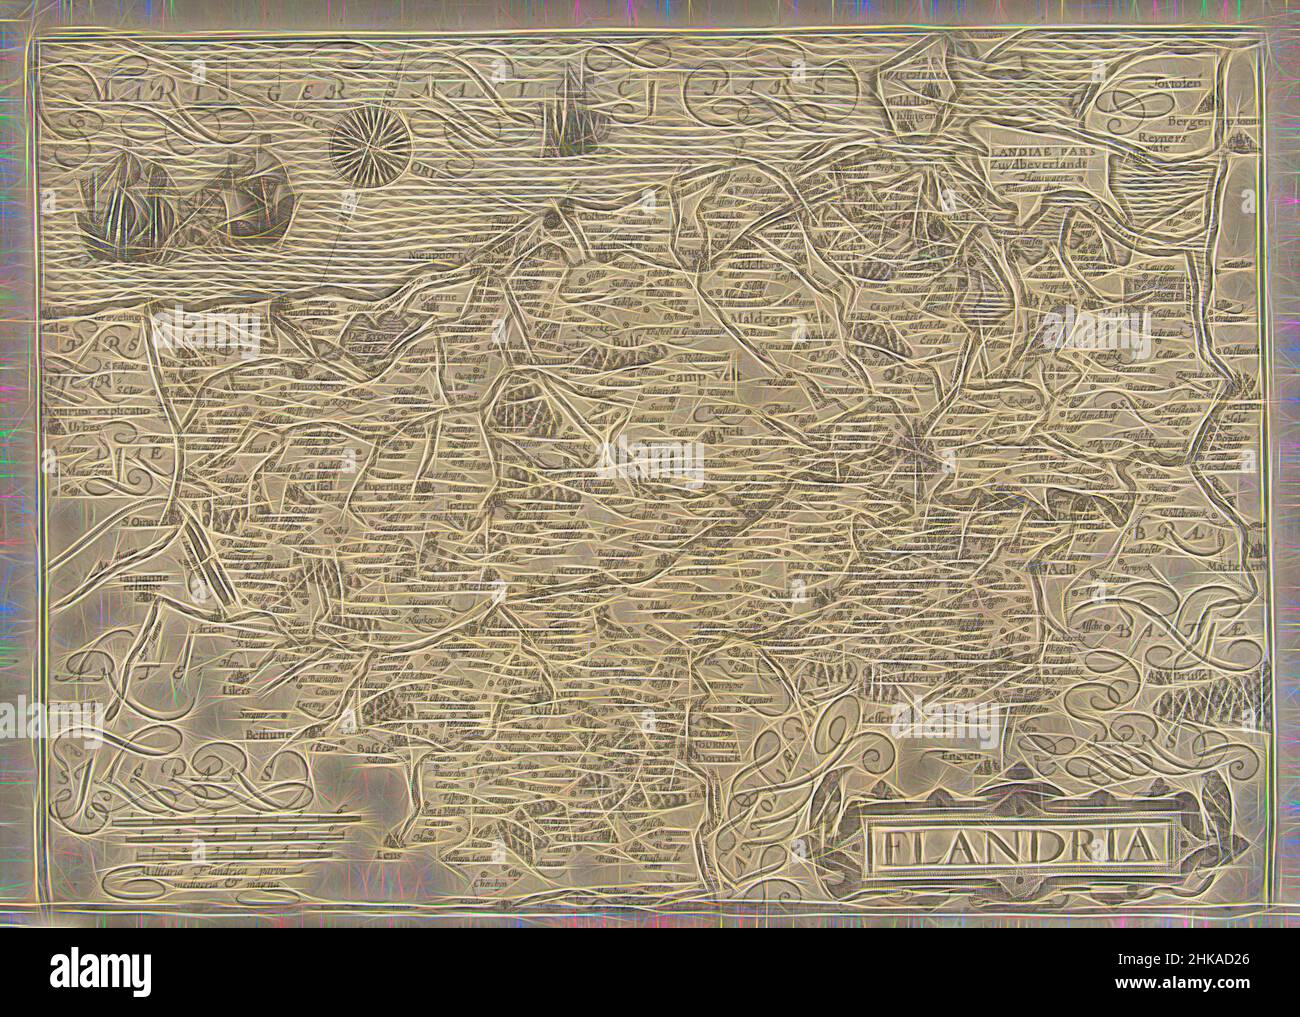 Inspired by Map of Flanders, ca. 1600, Flandria, Kurtze beschreibung der nechstehenden Mappen von Flandern, wor ein auch von den Stätten meldung gethan wirt, Map of Flanders, with inscriptions and the title in cartouche in Latin, ca. 1600. Part of a group of prints added to the illustrations for a, Reimagined by Artotop. Classic art reinvented with a modern twist. Design of warm cheerful glowing of brightness and light ray radiance. Photography inspired by surrealism and futurism, embracing dynamic energy of modern technology, movement, speed and revolutionize culture Stock Photo